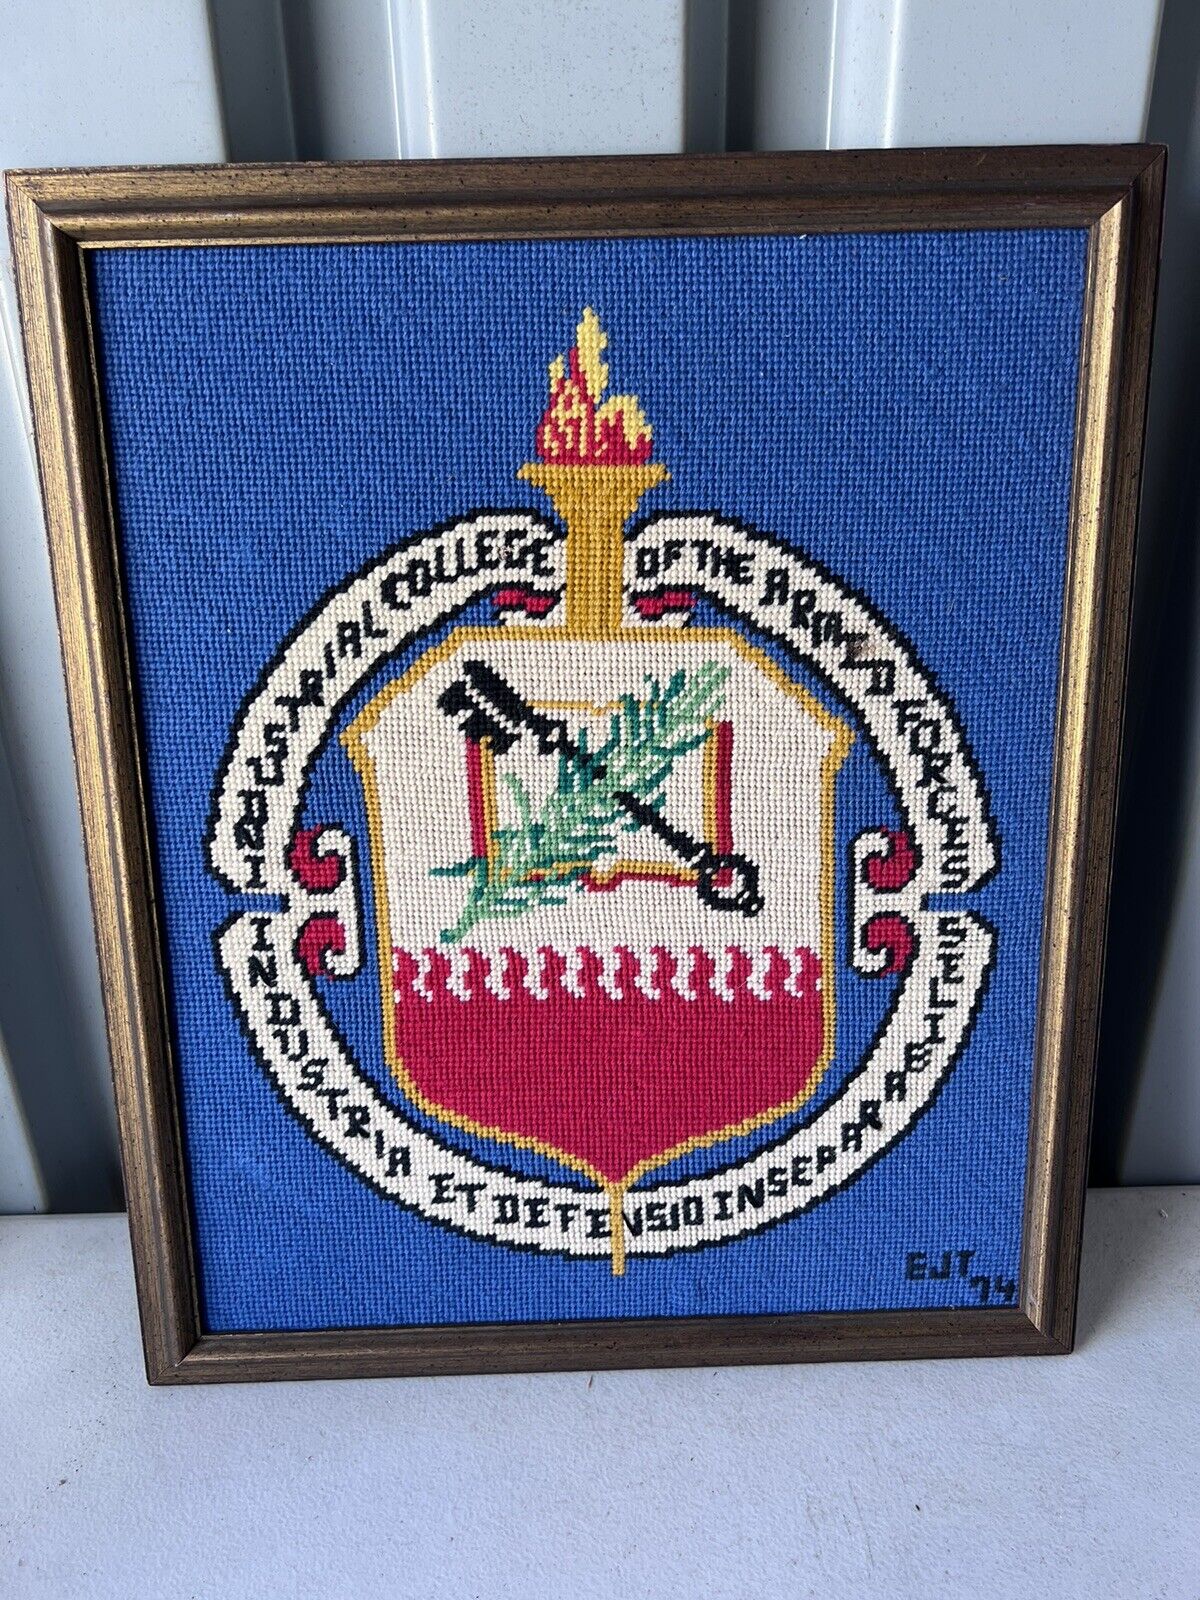 Industrial College Of The Armed Forces Embroidered Framed 1974 Crest